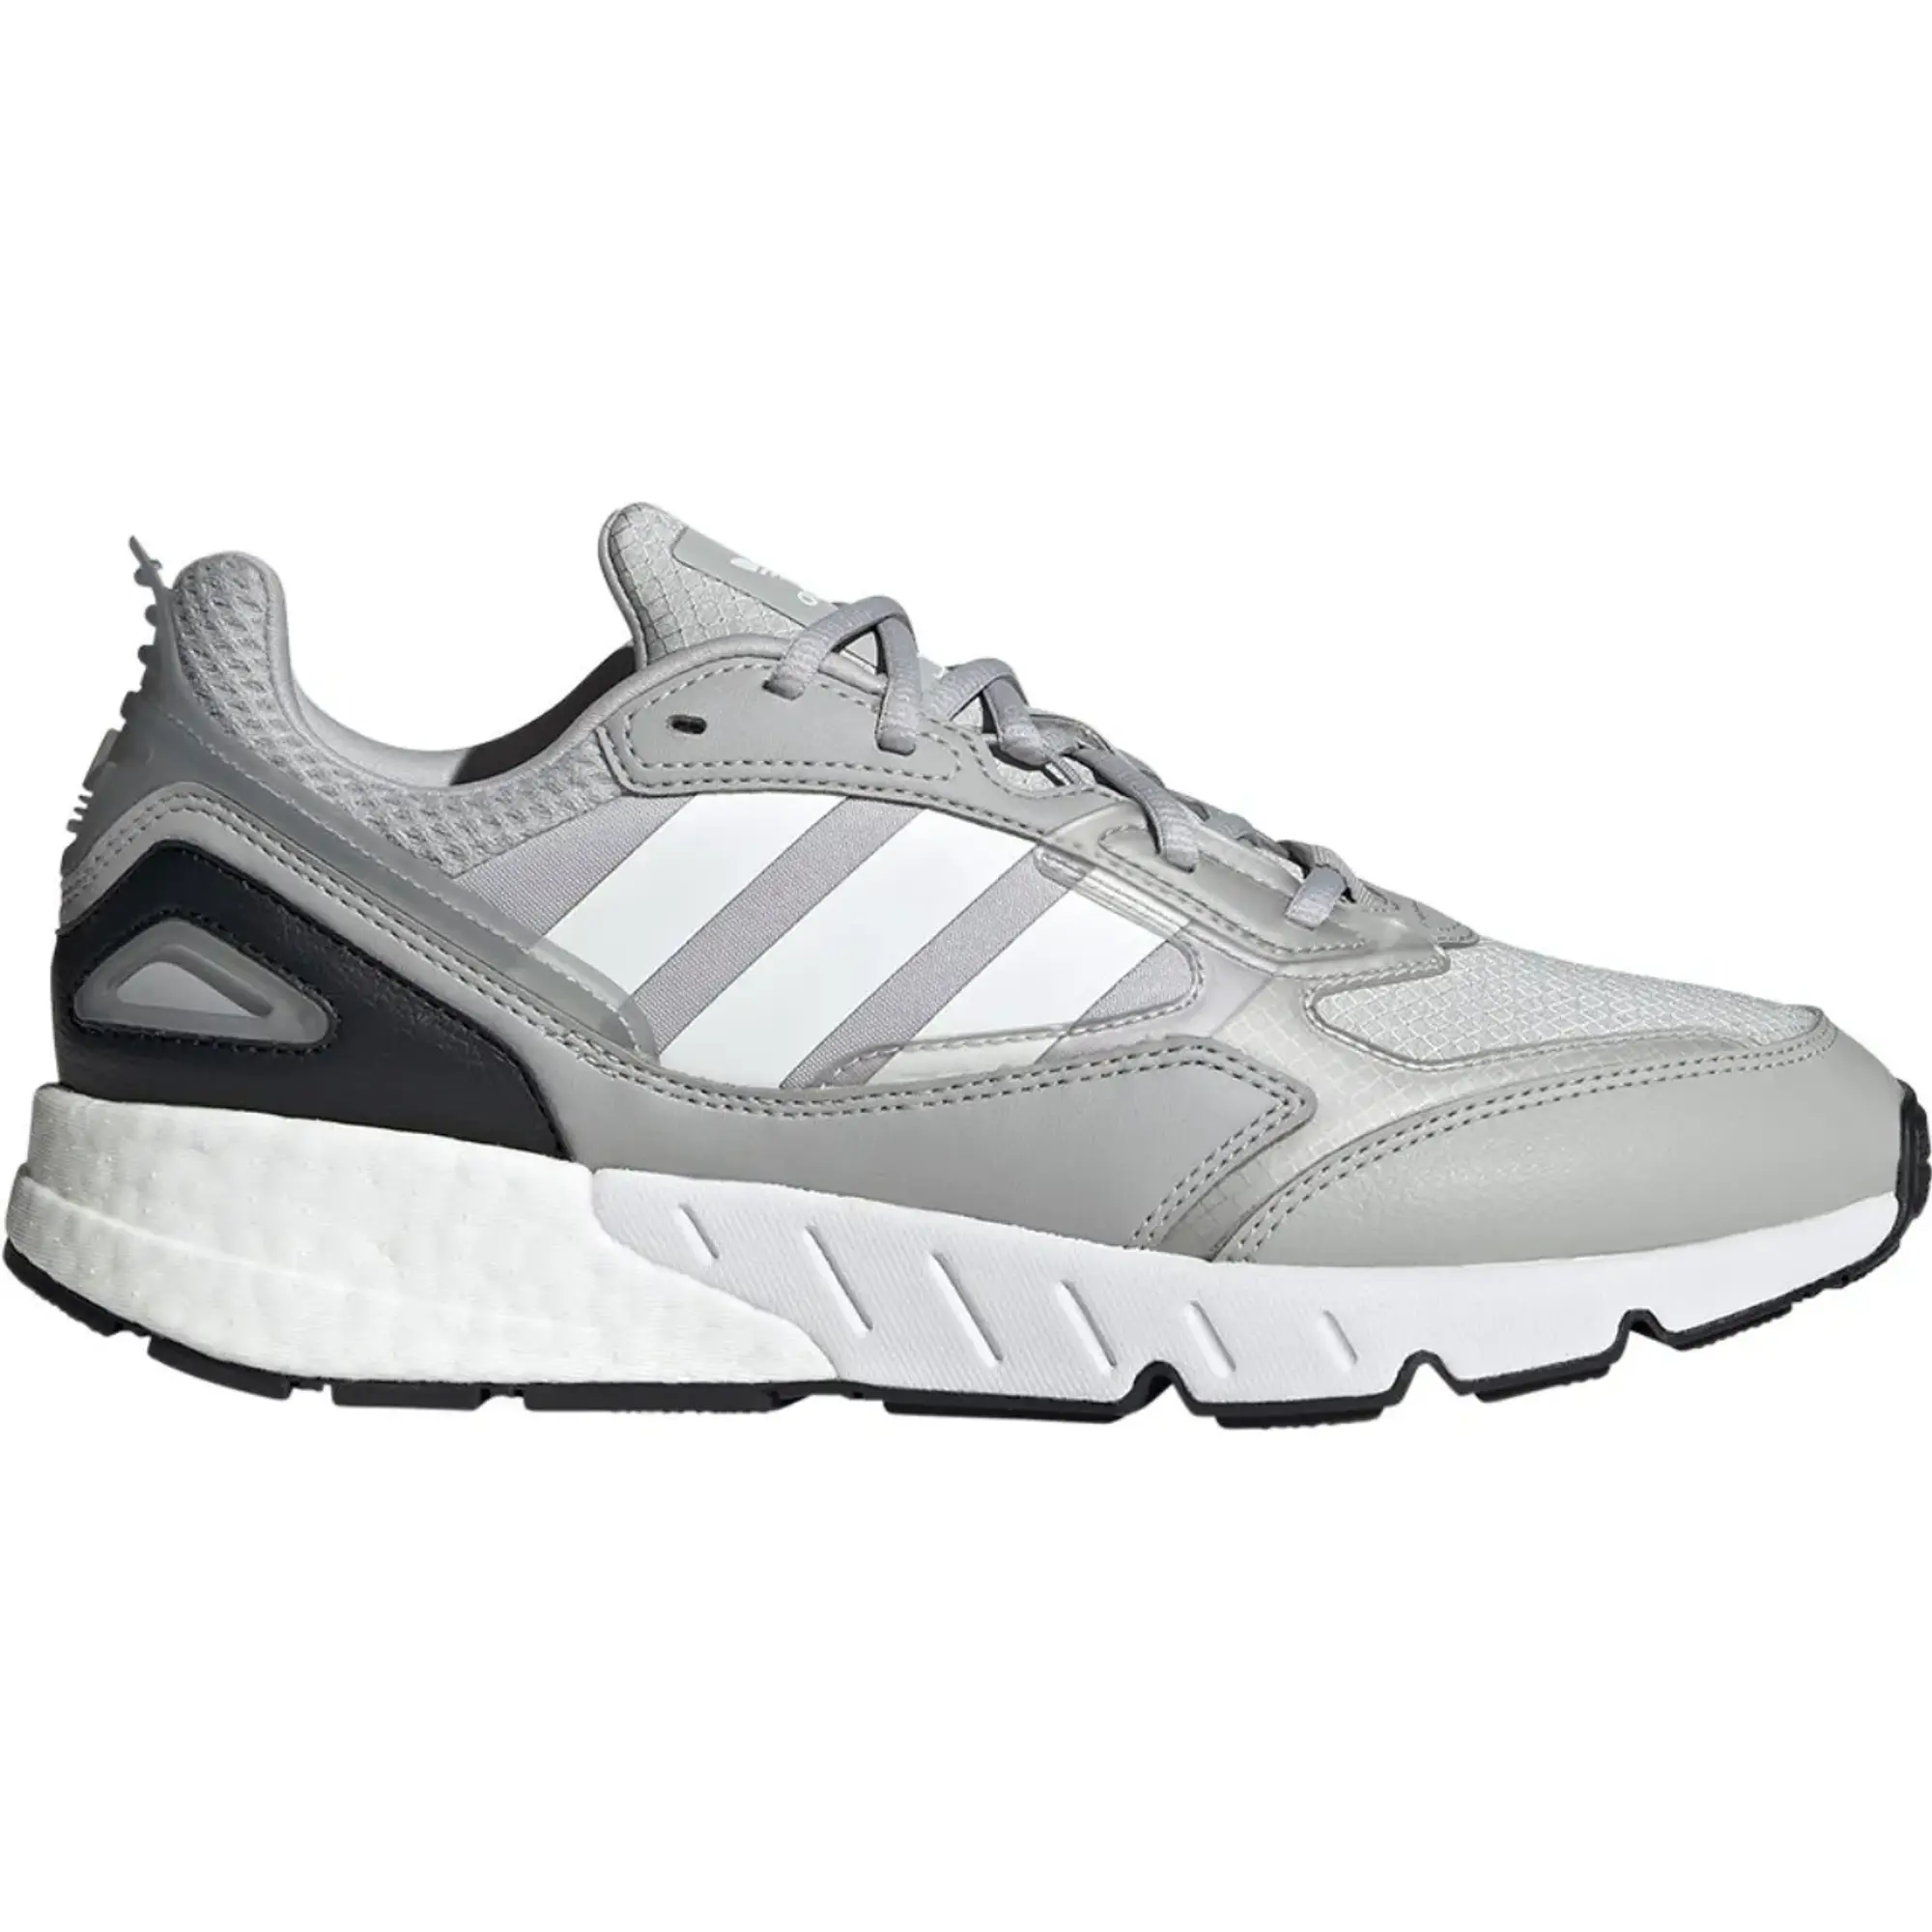 Adidas Zx 1K Boost 2.0 Grey Two/ Ftw White/ Core Black